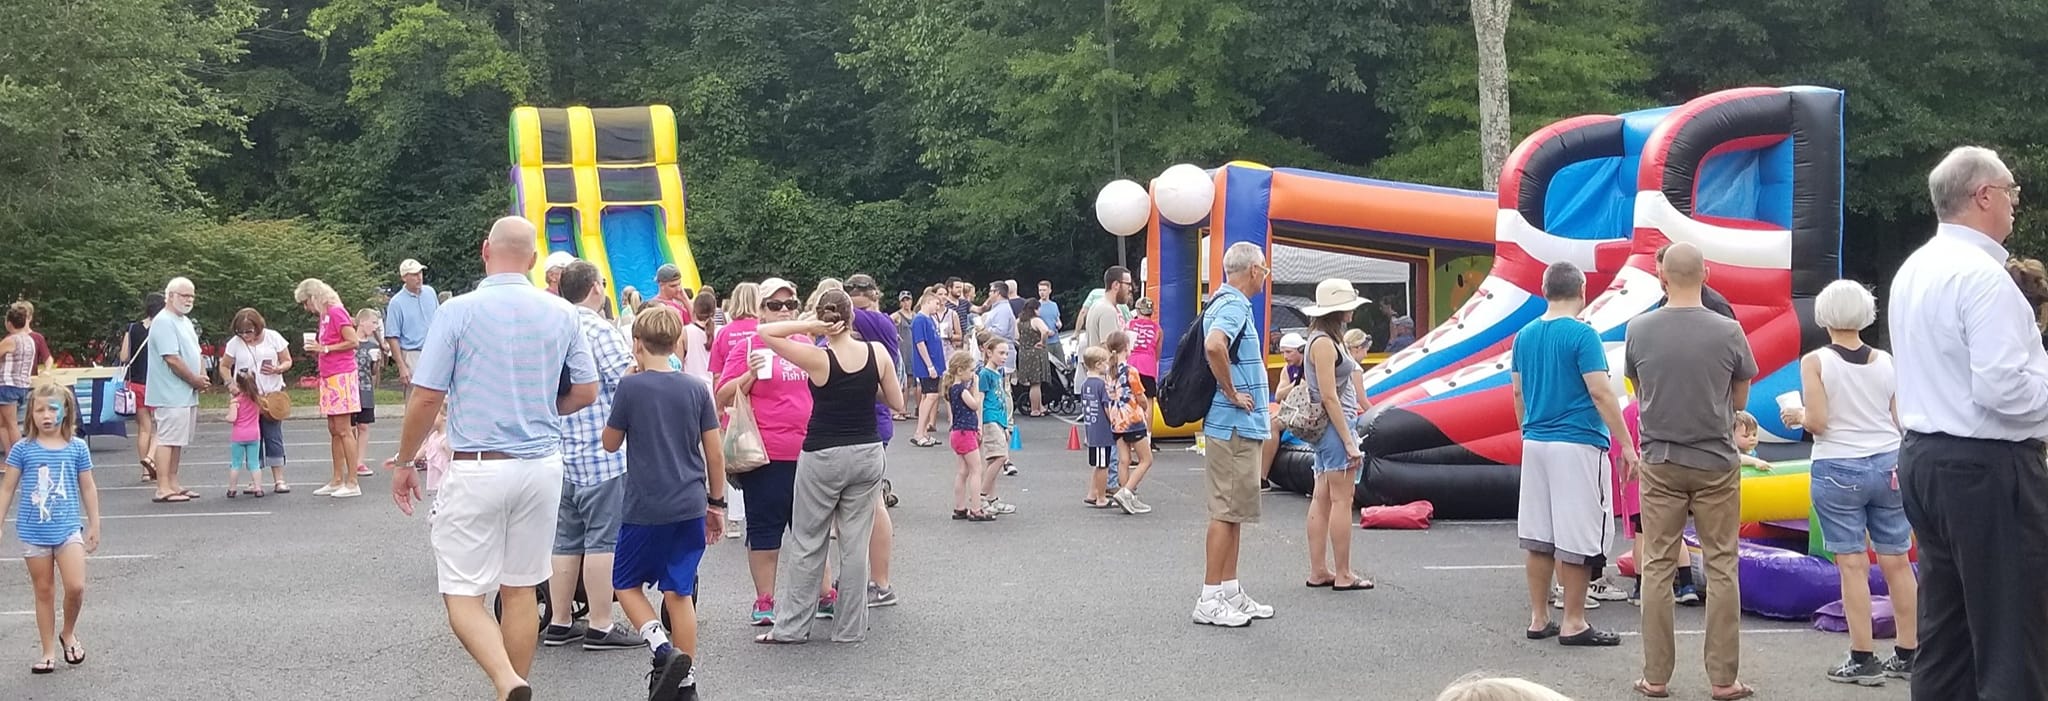 Bethlehem UMC Fish Fry in Franklin, Tennessee offers all-you-can-eat catfish, live music, a free children’s area, a silent auction, art, bake sale, a book sale and more!